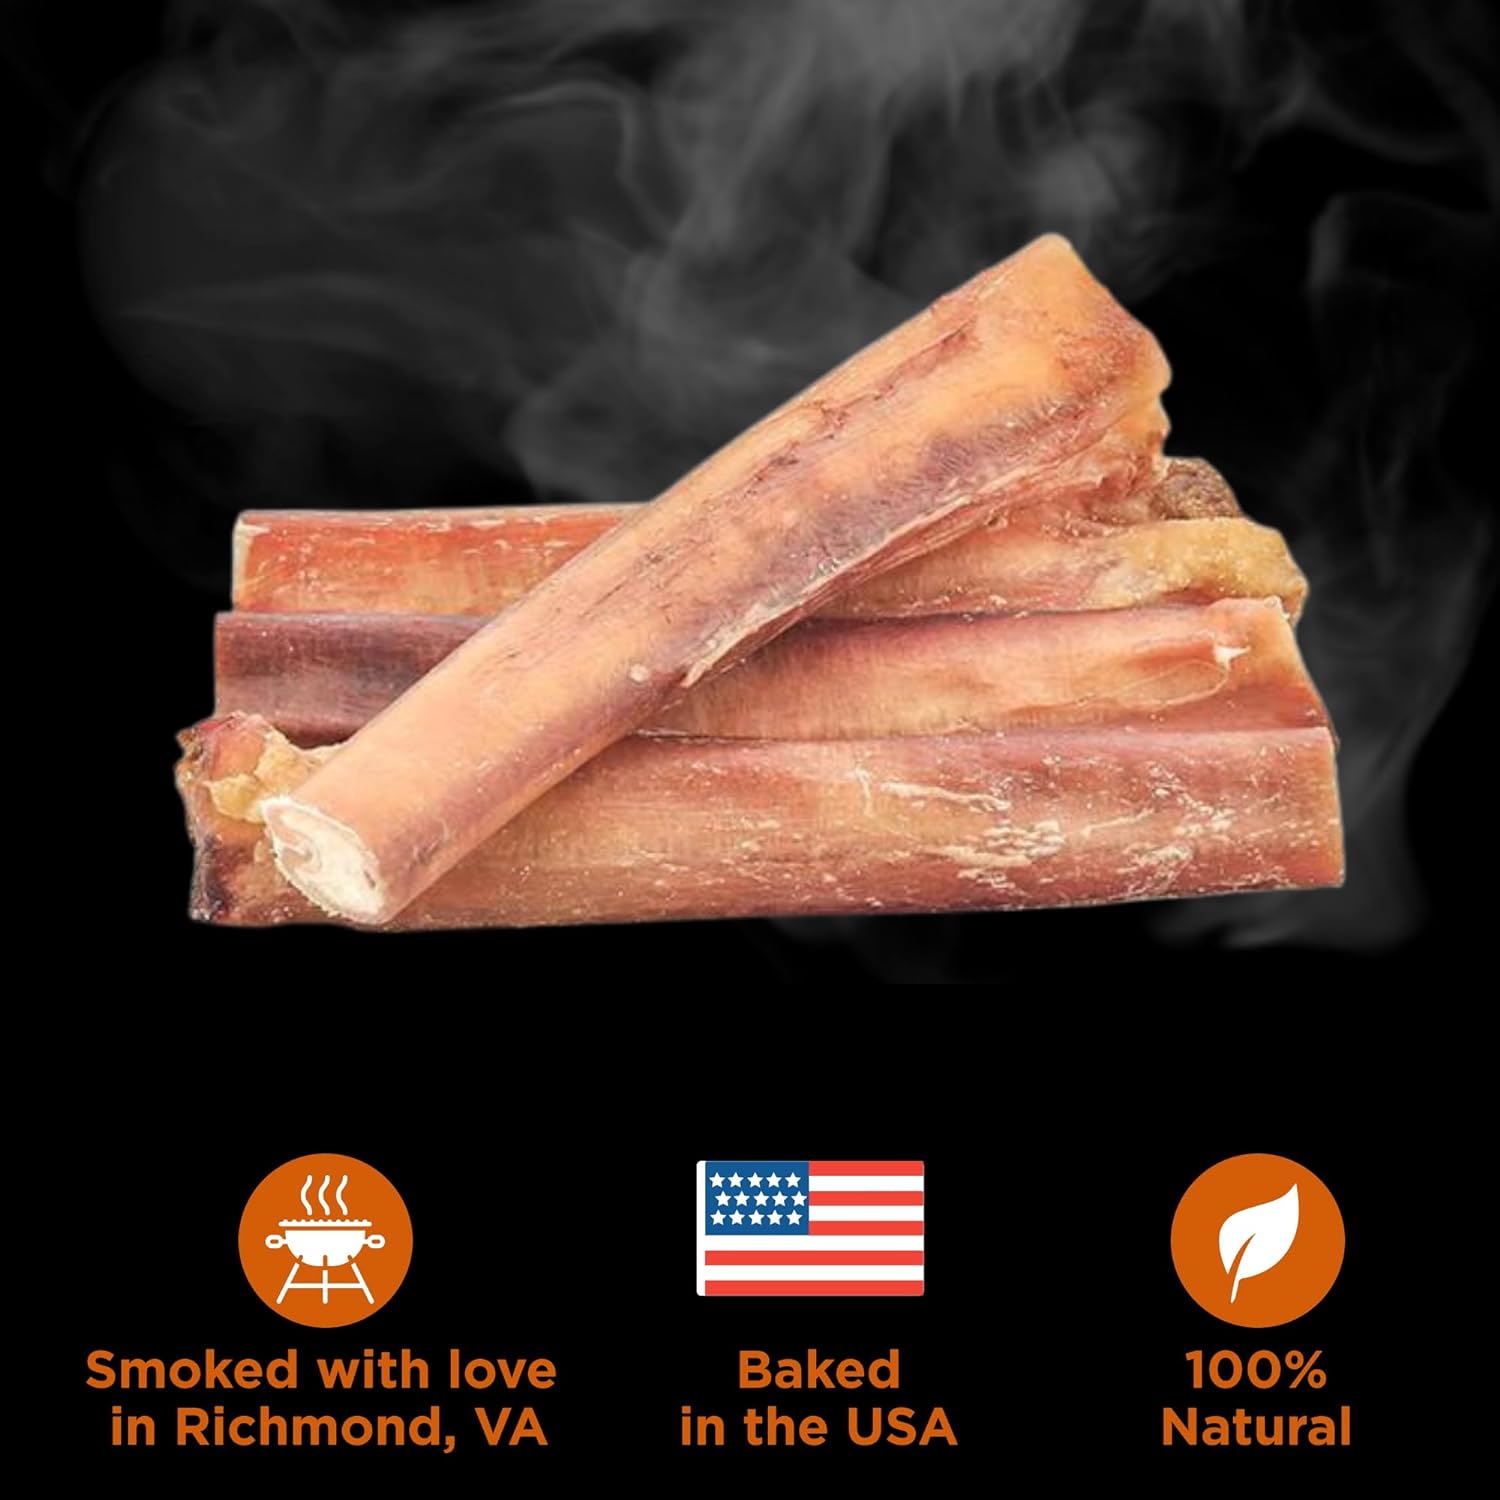 Best Bully Sticks Hickory Smoked 100% Natural Jumbo 6 Inch Bully Sticks for Dogs, 4 Pack - Smoky, Odor-Free No Additives Grain-Free Beef Dog Chews : Pet Supplies